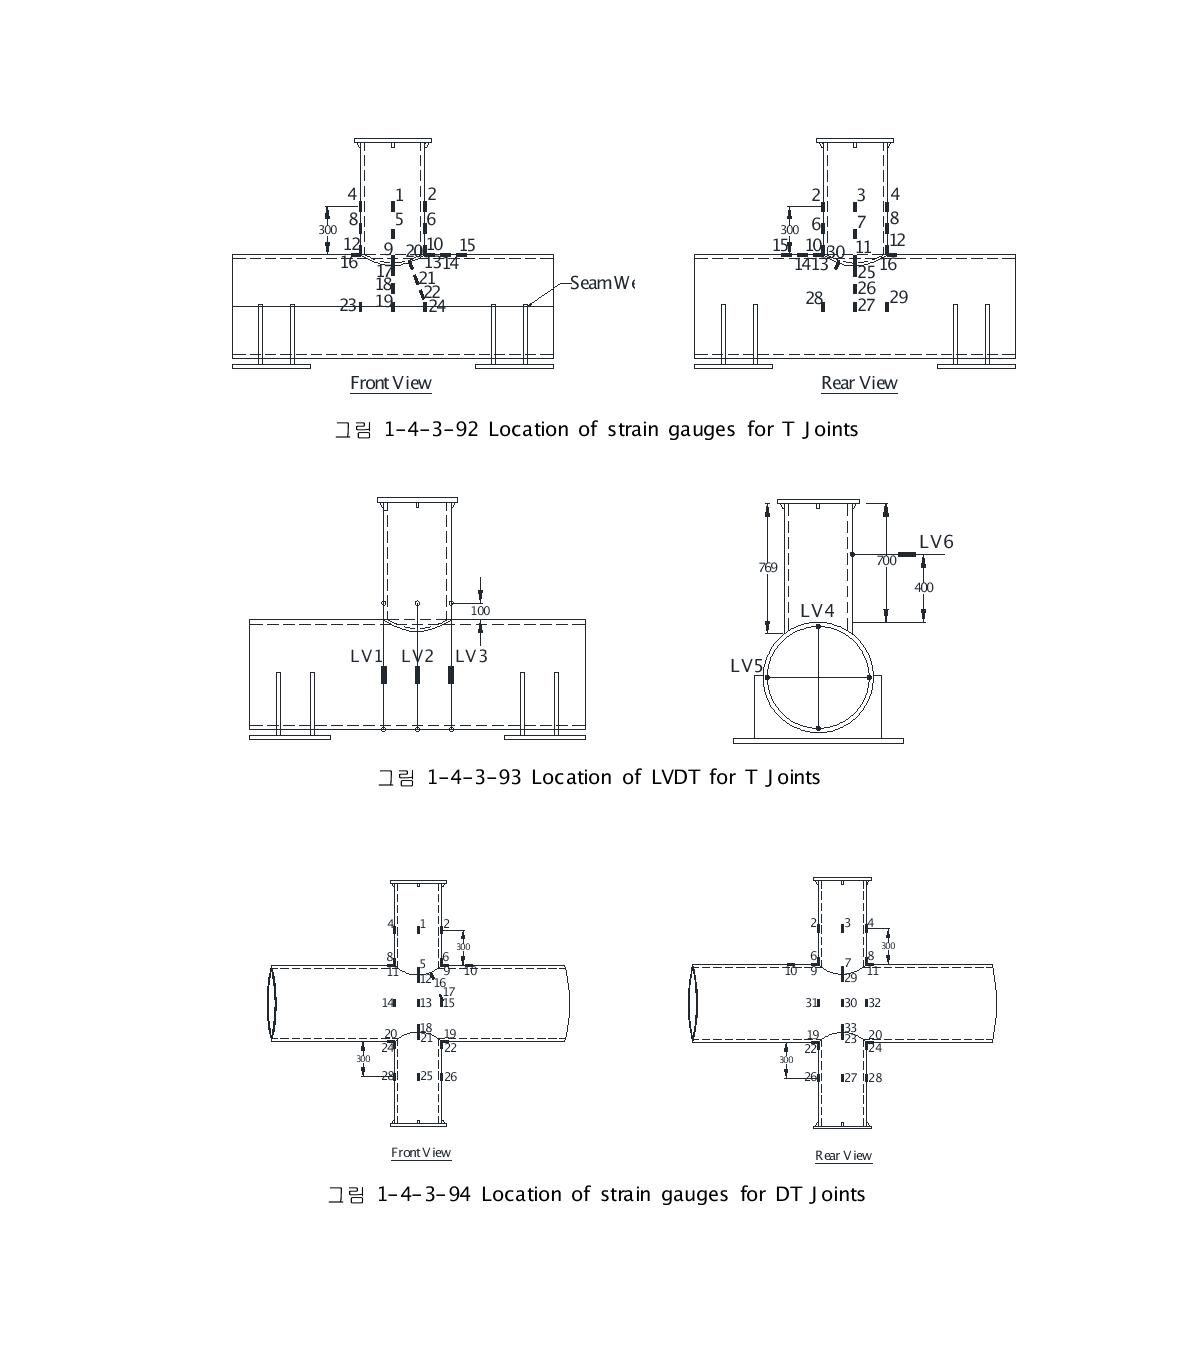 Location of strain gauges for T Joints